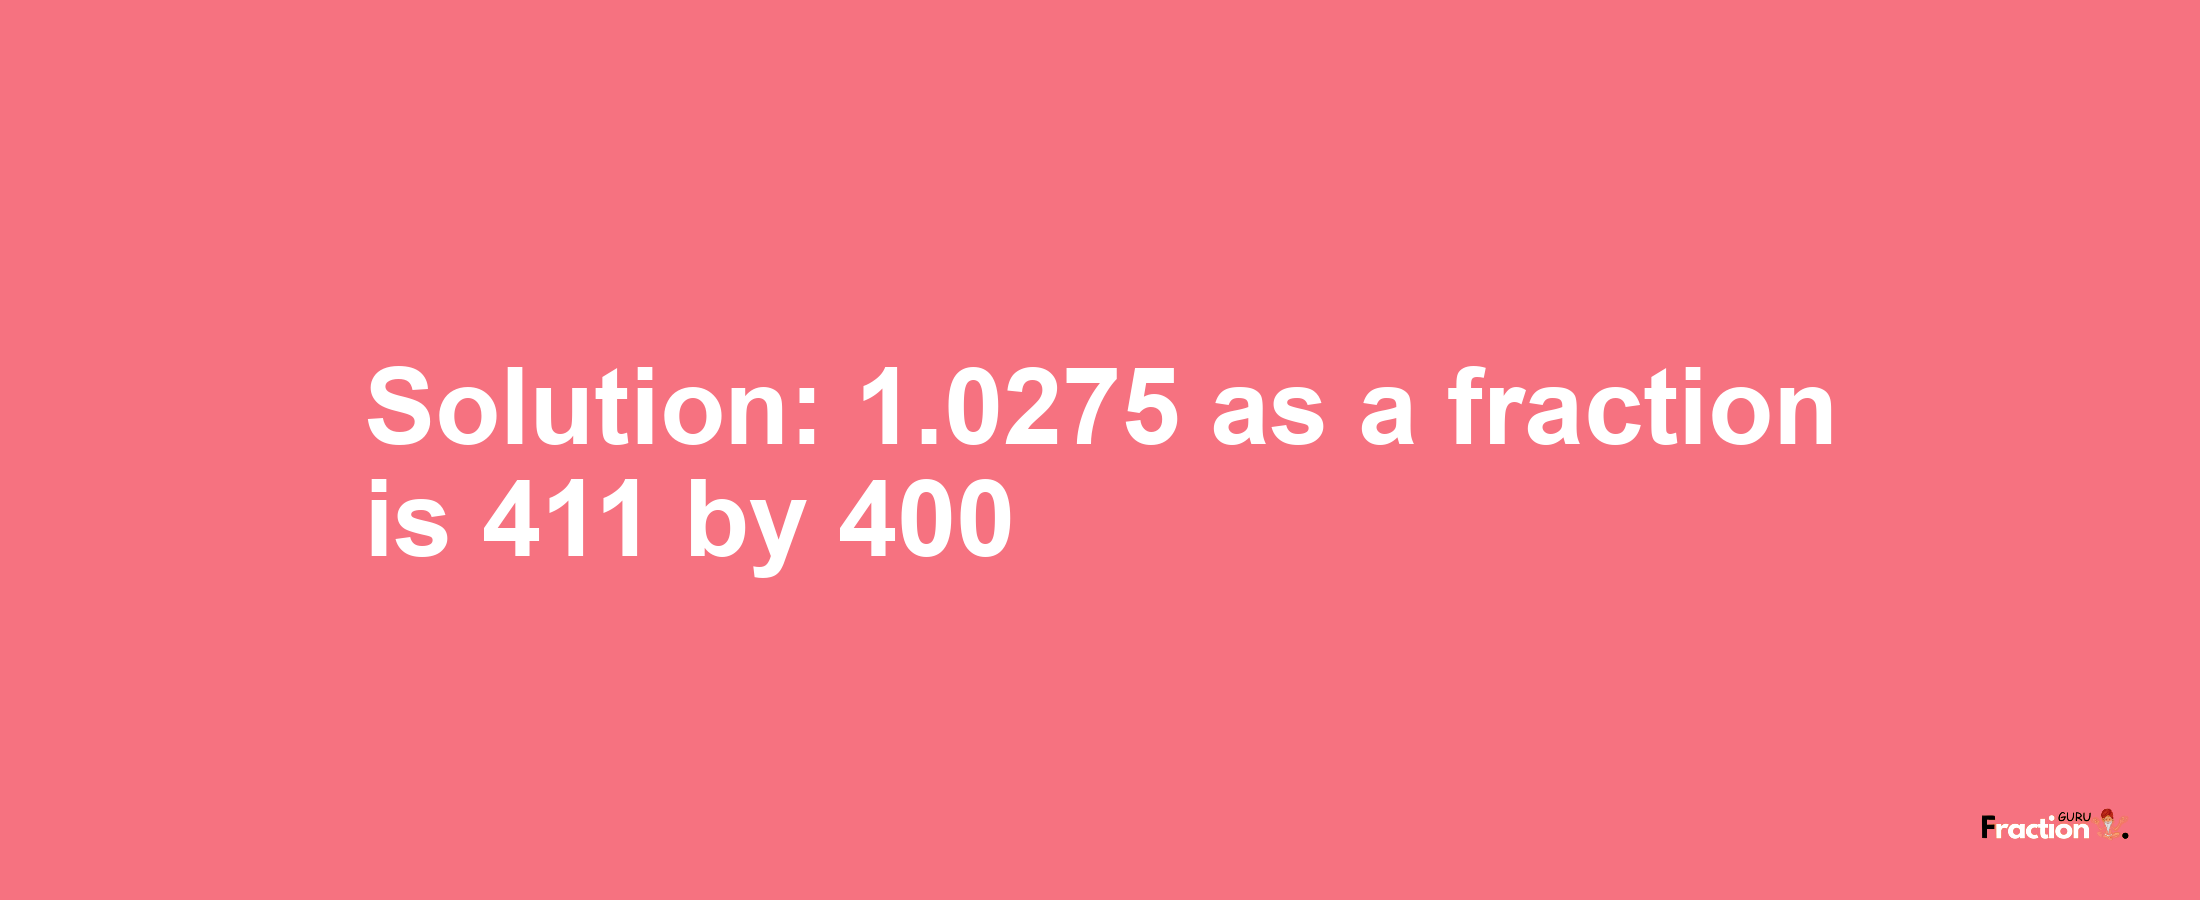 Solution:1.0275 as a fraction is 411/400